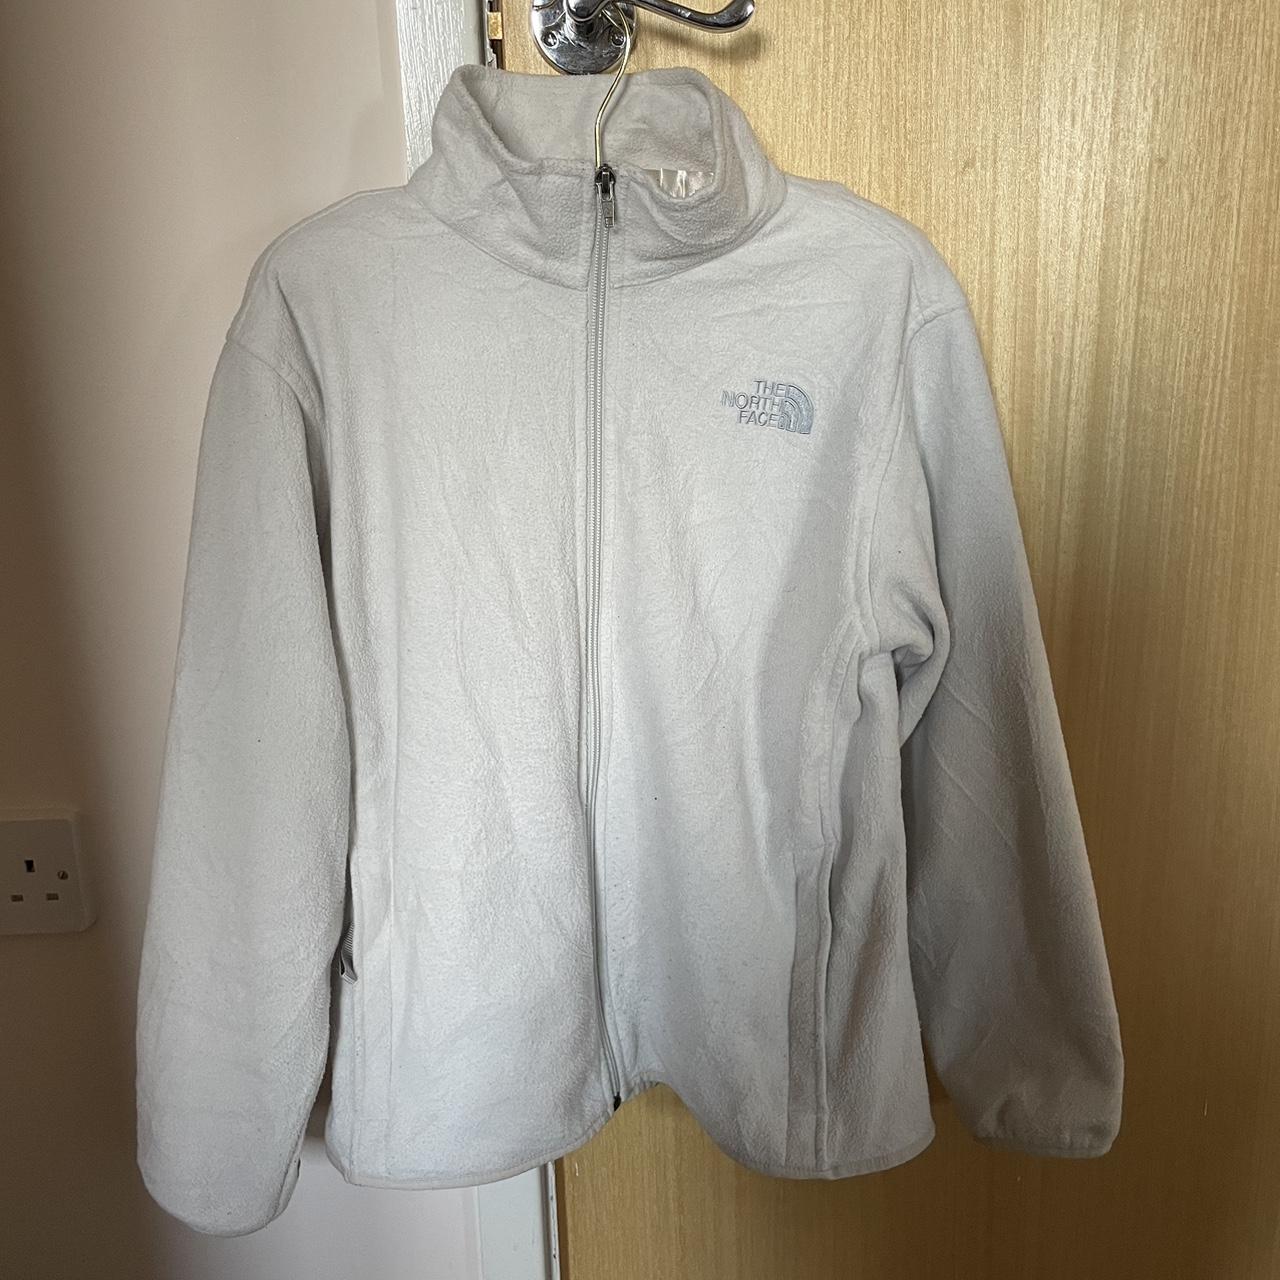 The North Face Women's White and Cream Jacket | Depop